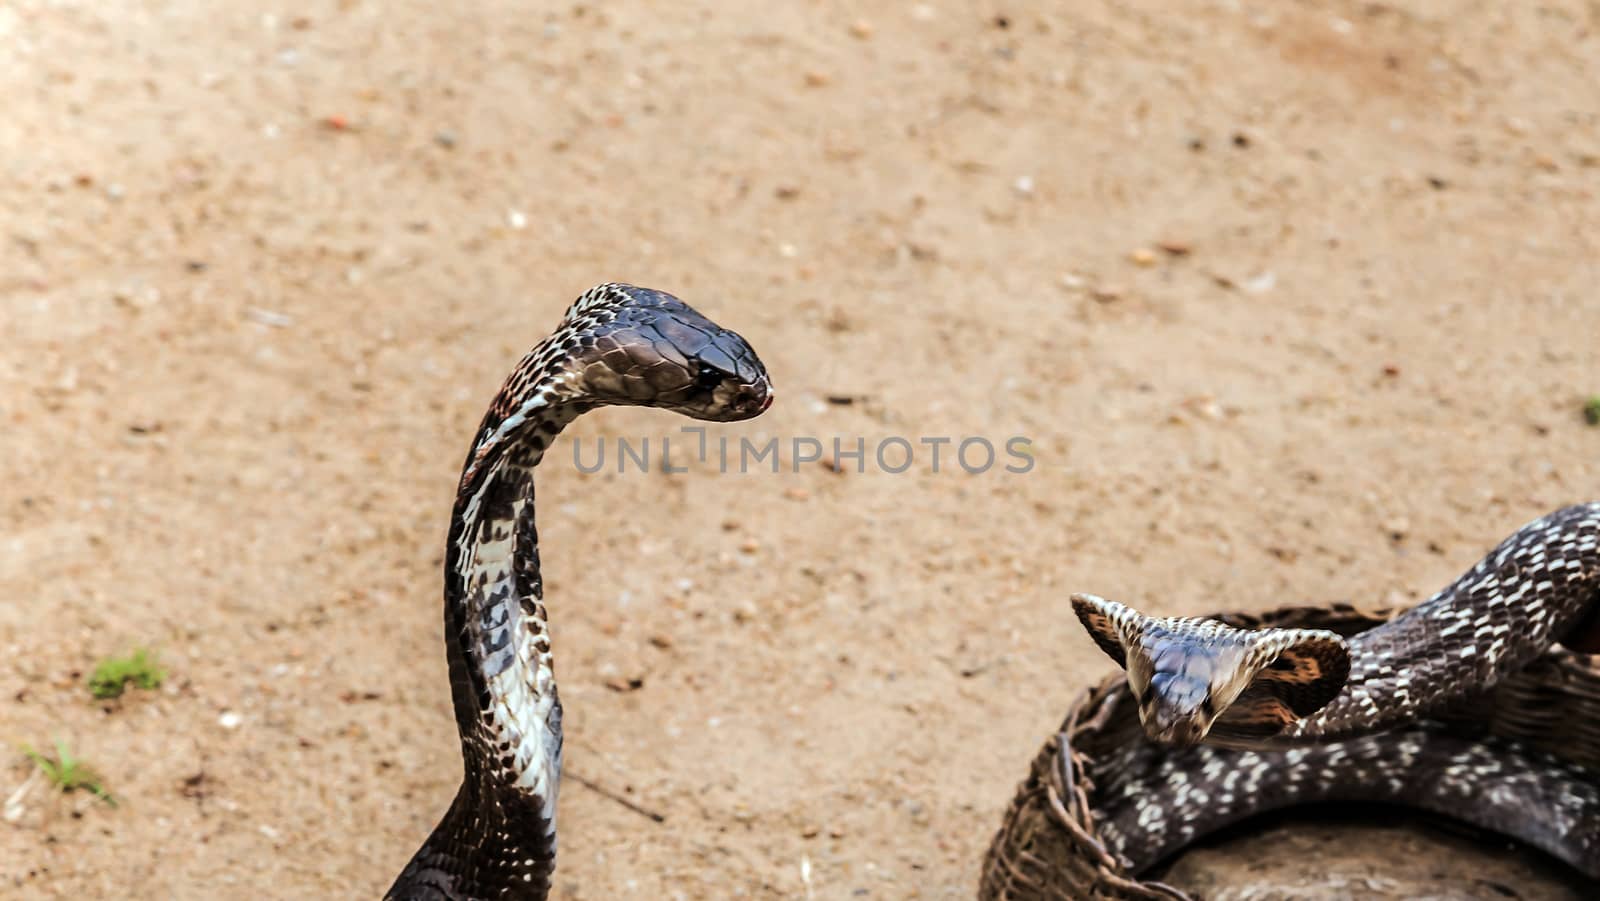 king cobra in its defensive posture with their hoods extended